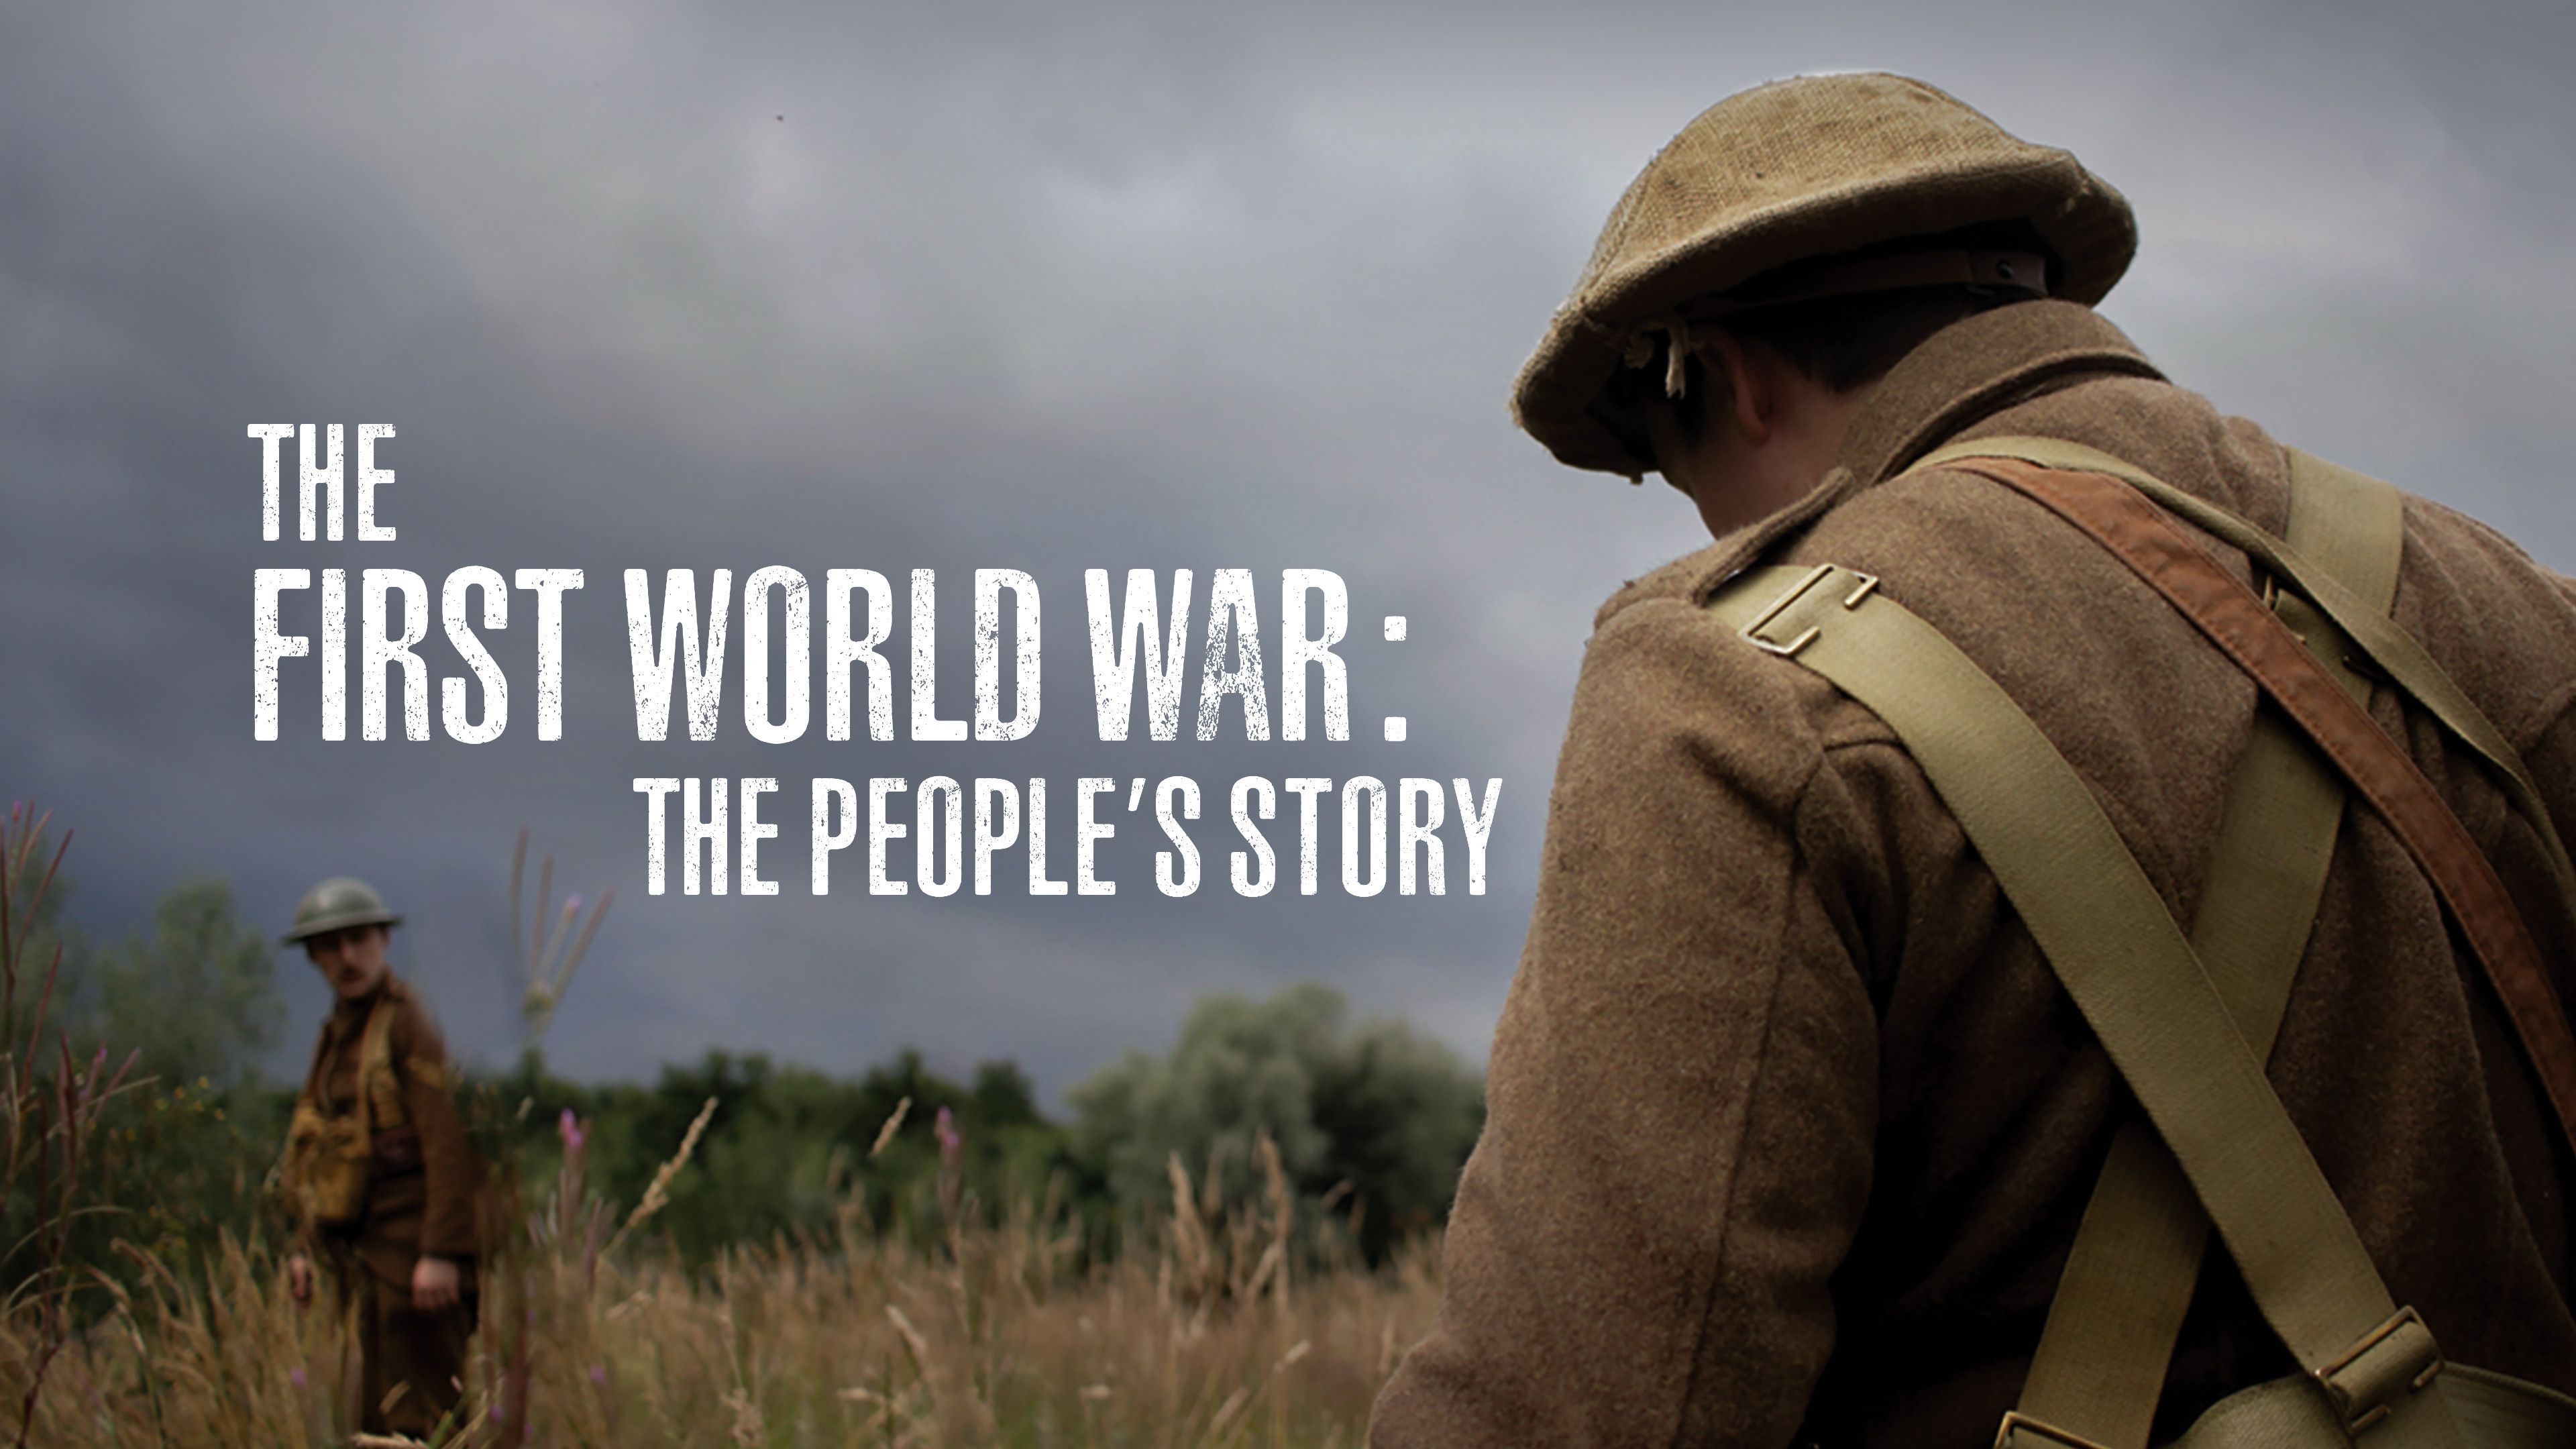 The First World War: The People’s Story